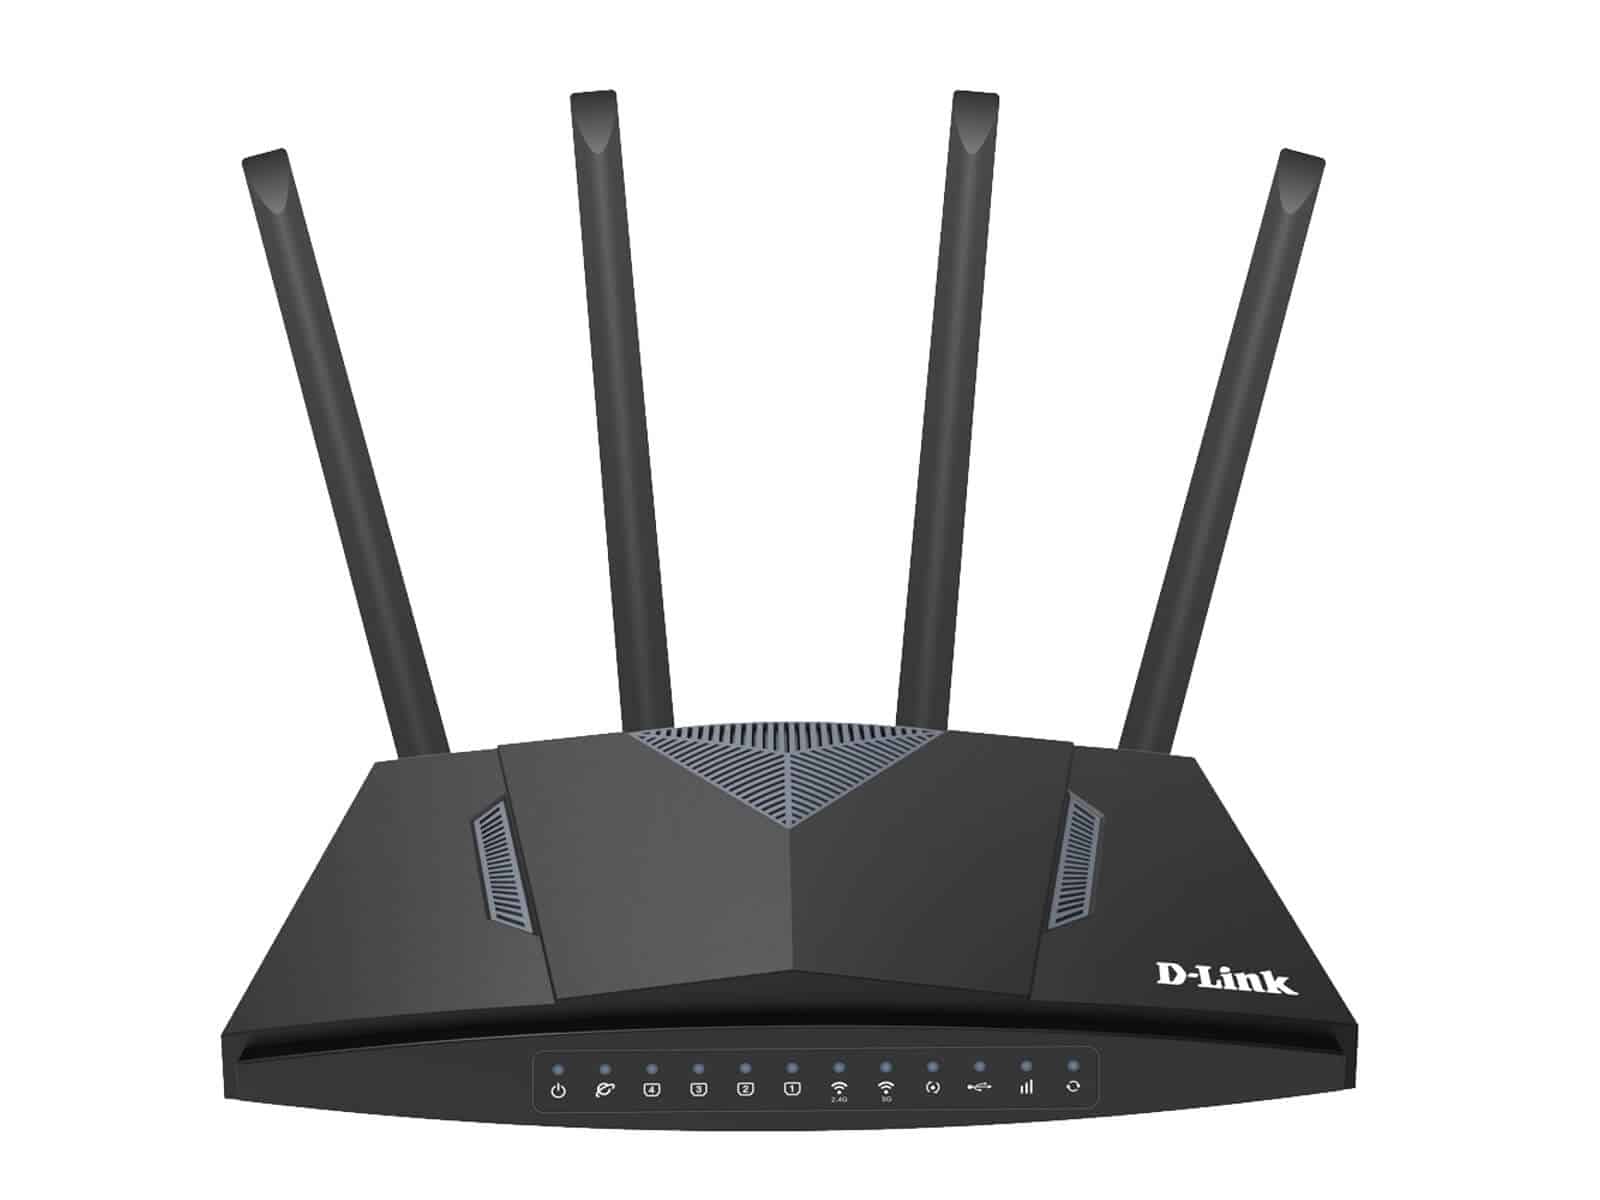 Opdage Frastøde Paradoks How to change your Telkom fibre D-Link DWR-956M router username and password